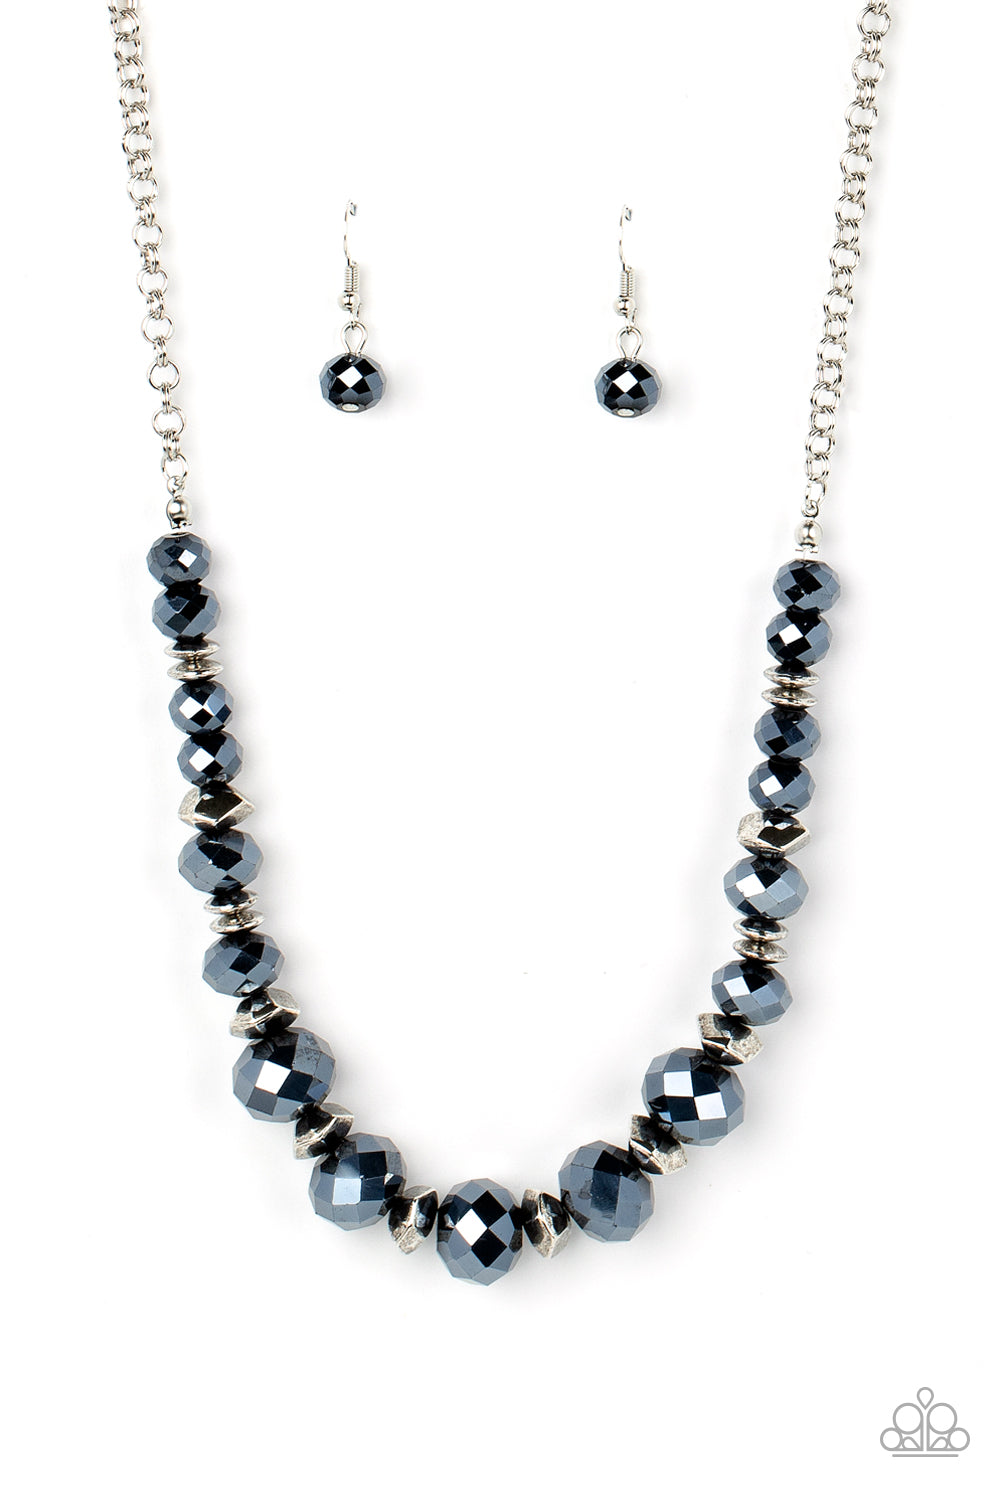 Cosmic Cadence - Blue Crystal-Like Gems/Silver Discs/Faceted Silver Accent Paparazzi Necklace & matching earrings